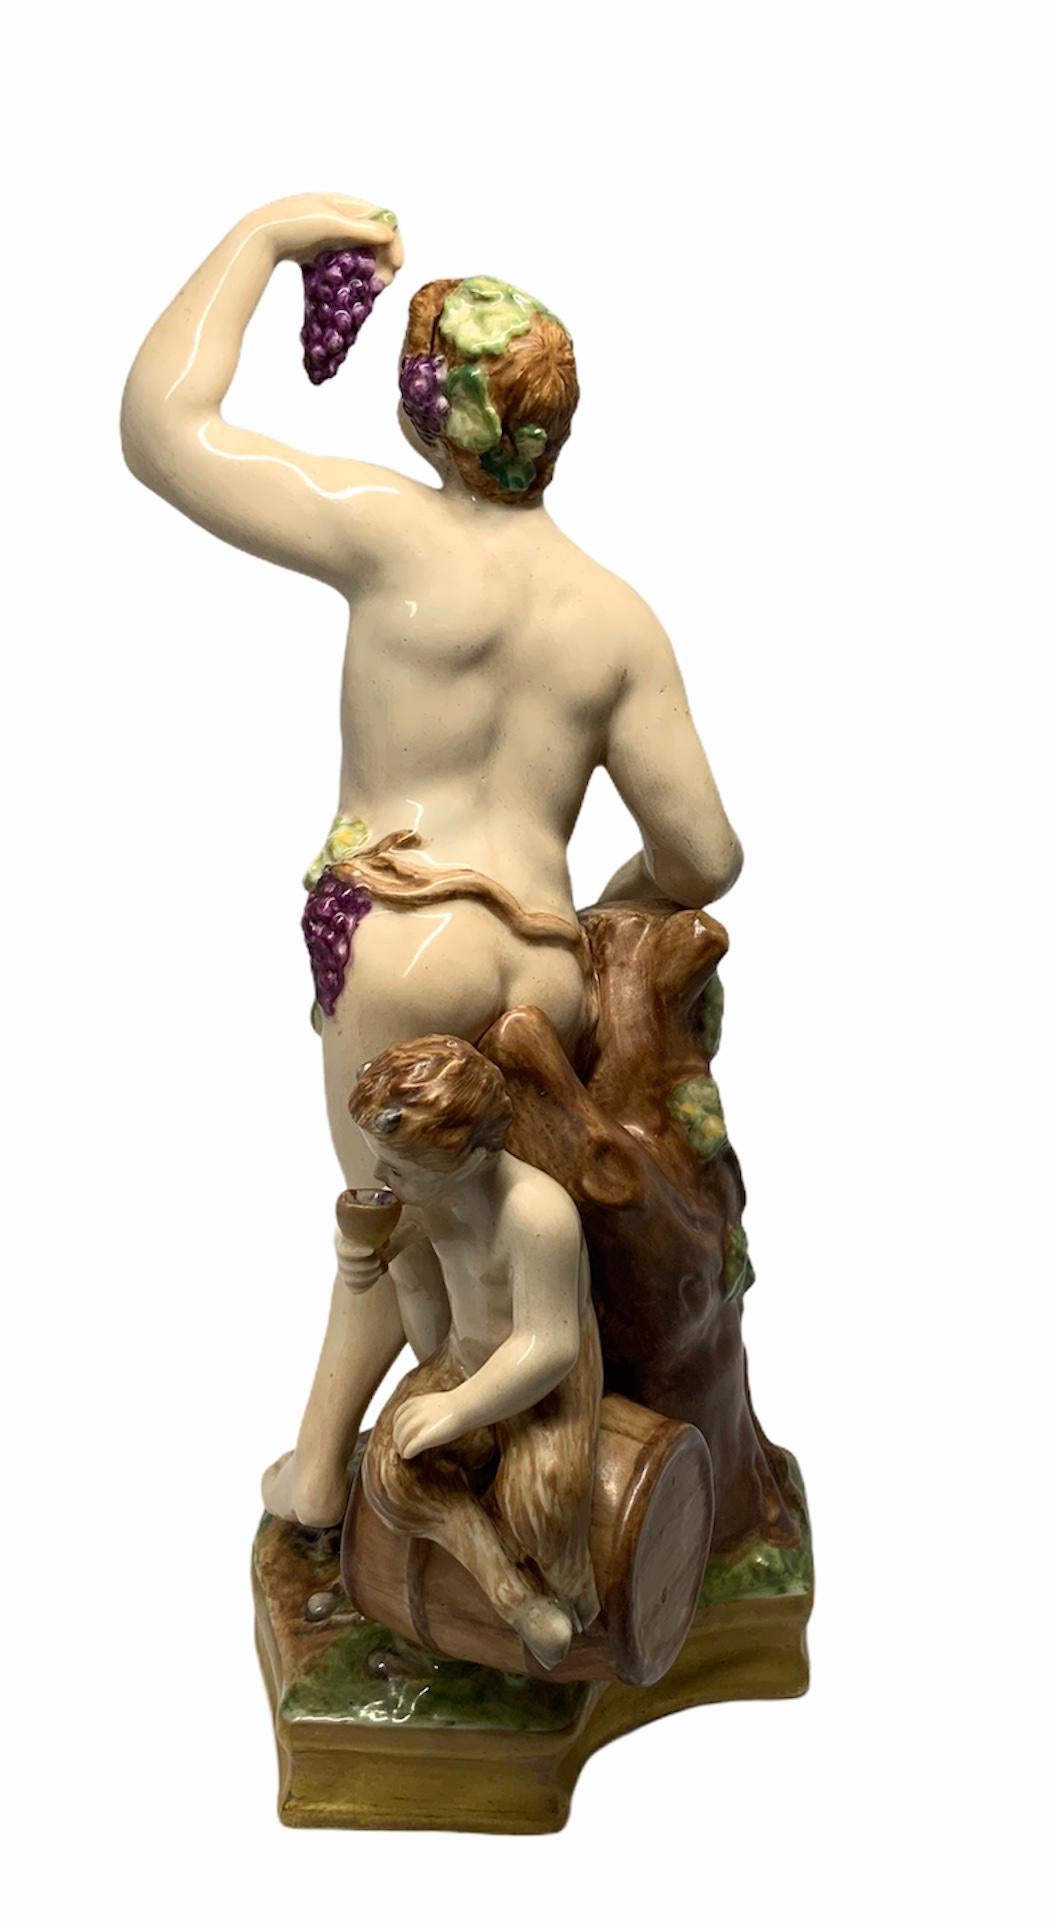 This is a hand painted porcelain of a semi nude Bacchus standing in front of a cut tree trunk while holding up a bunch of grapes. Behind him is a child faun drinking a cup of wine while sitting over a barrel of wine. There is a grape’s vine that